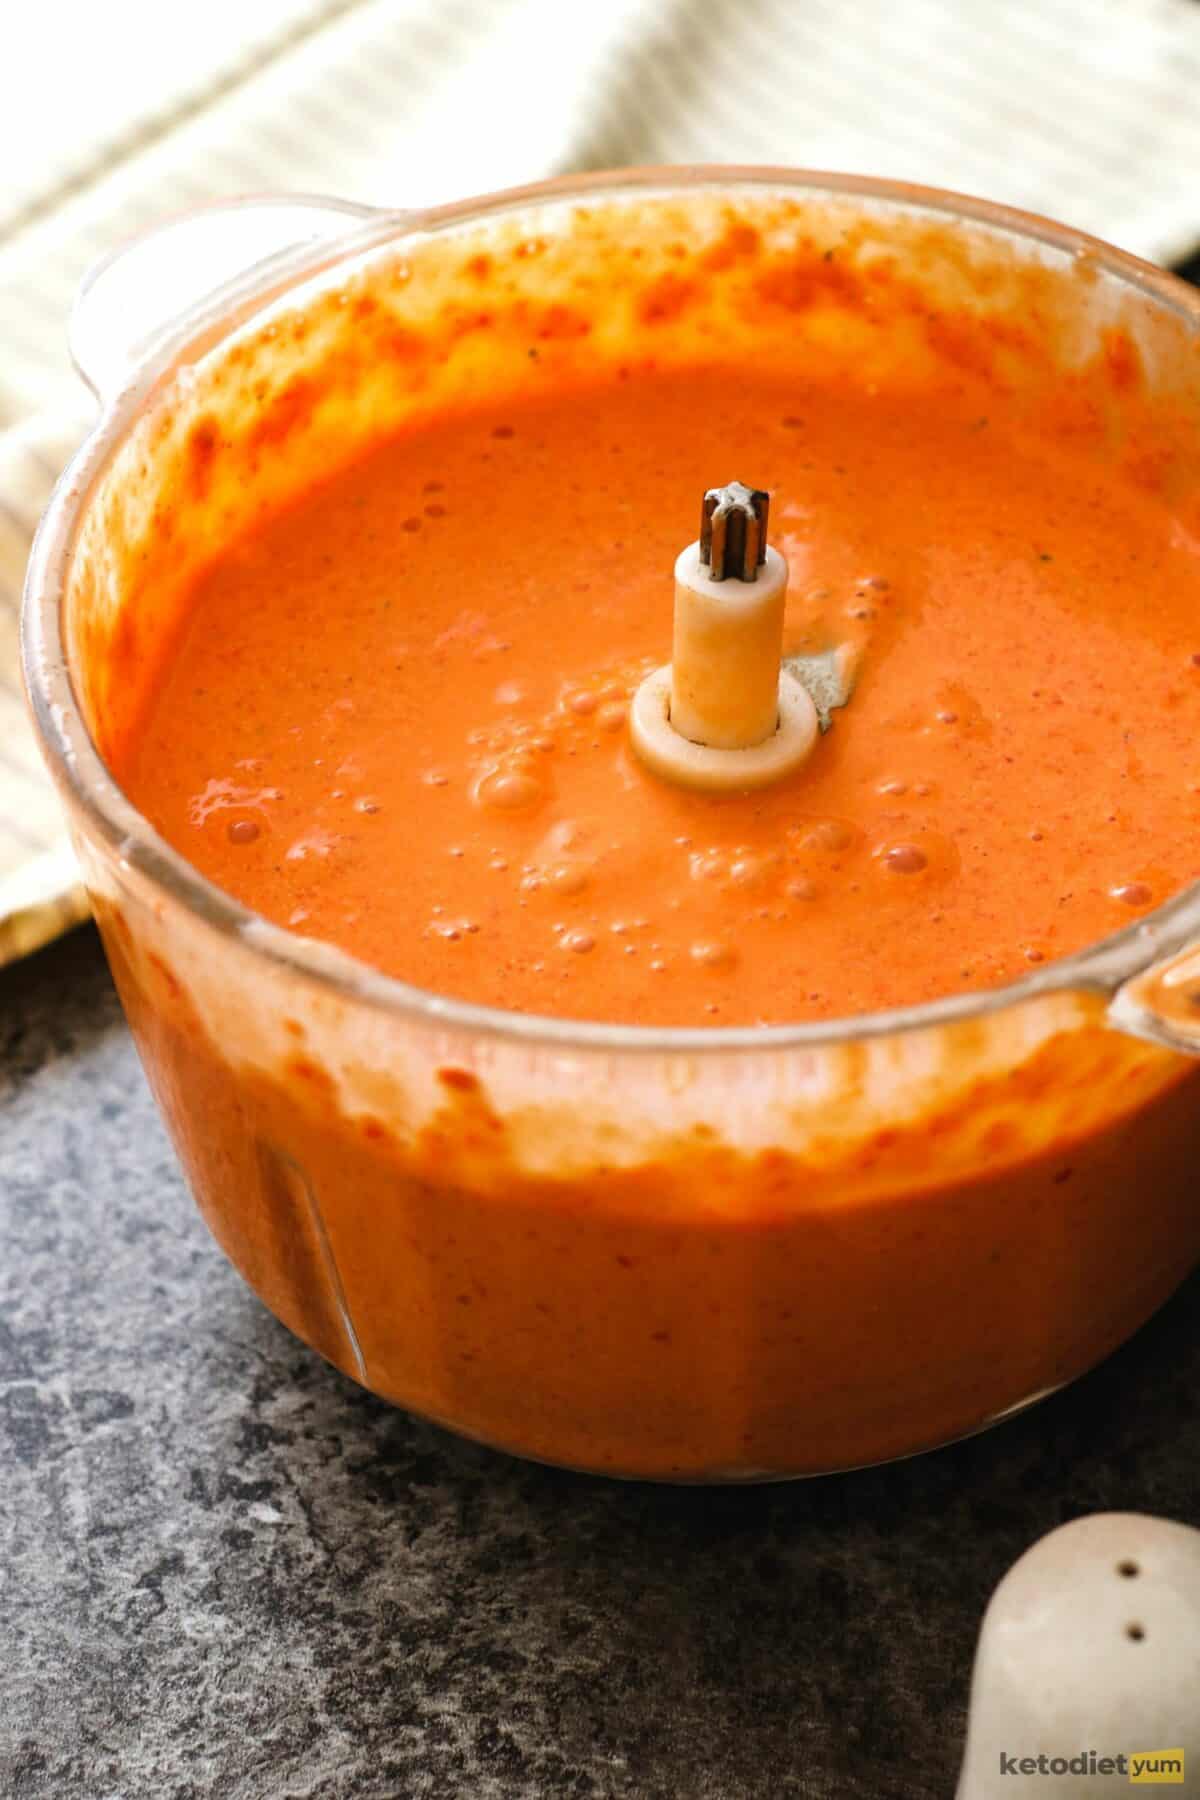 Roasted Red Pepper Gouda Soup